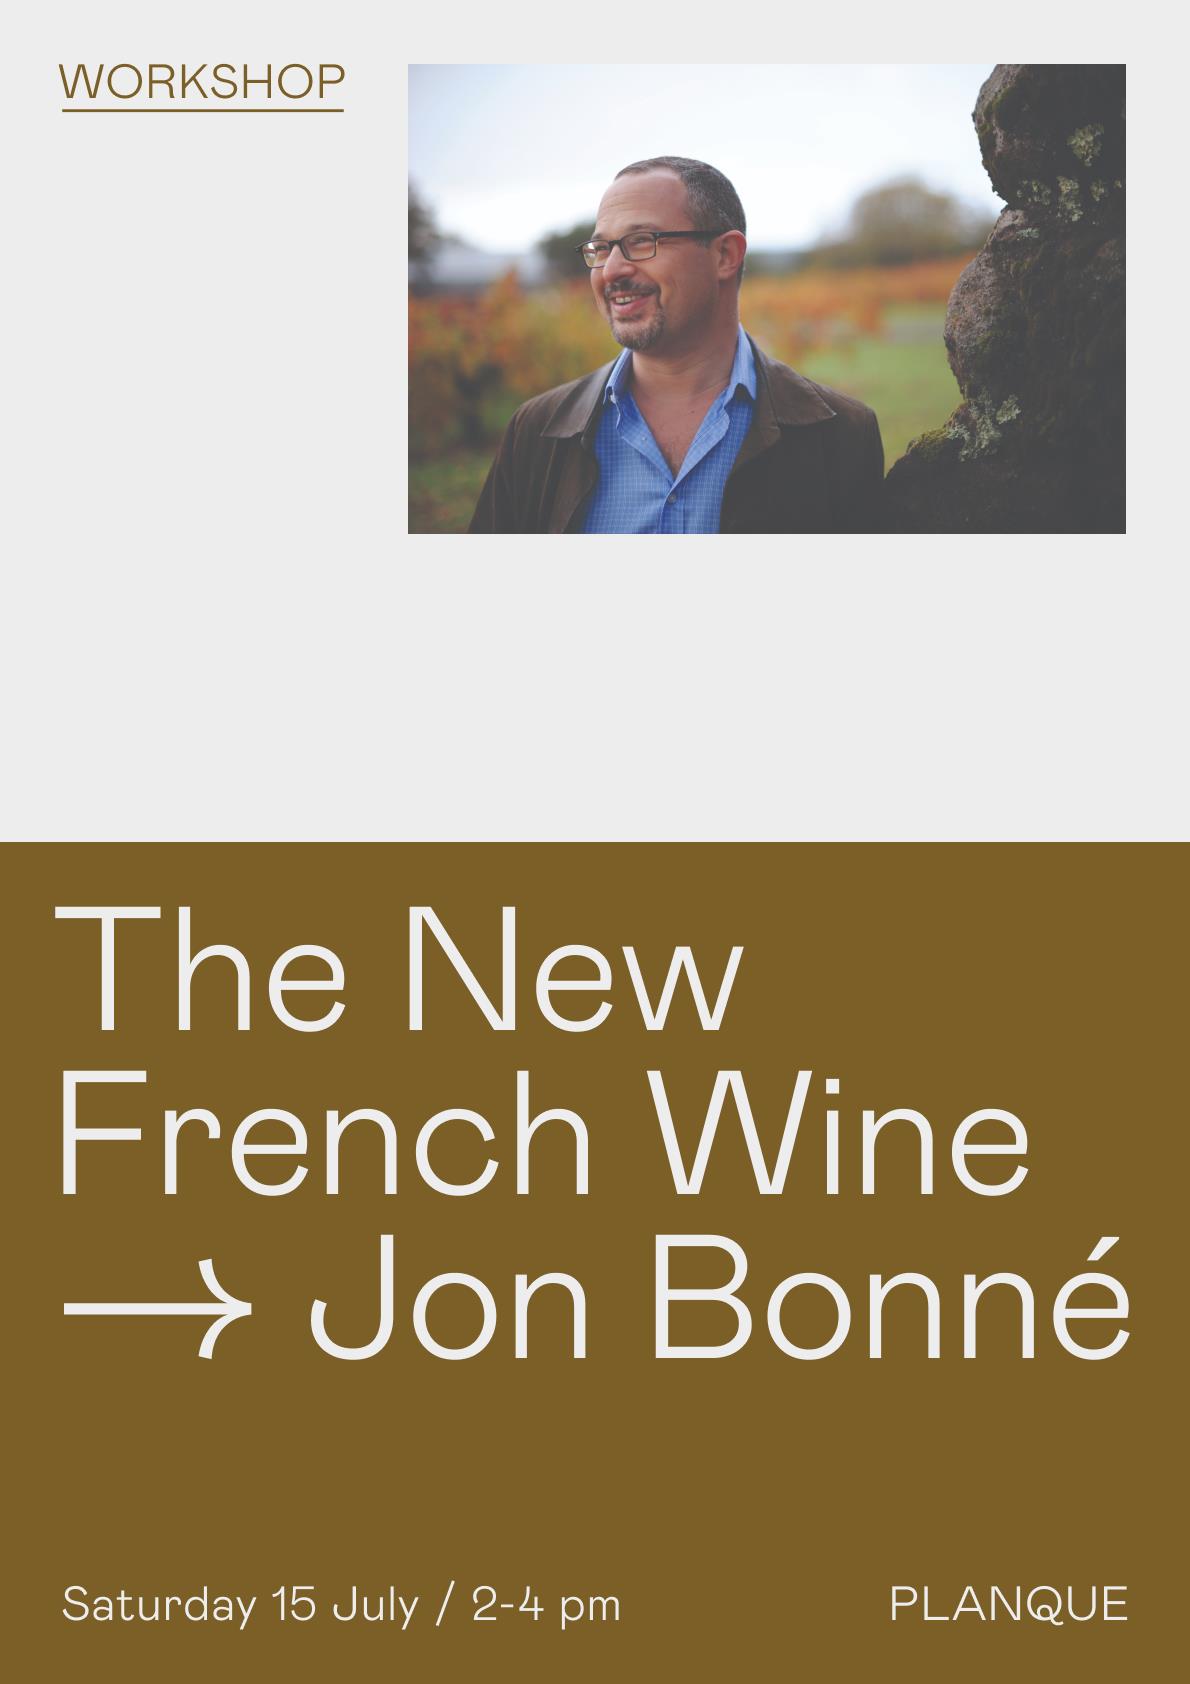 Workshop: The New French Wine with Jon Bonné